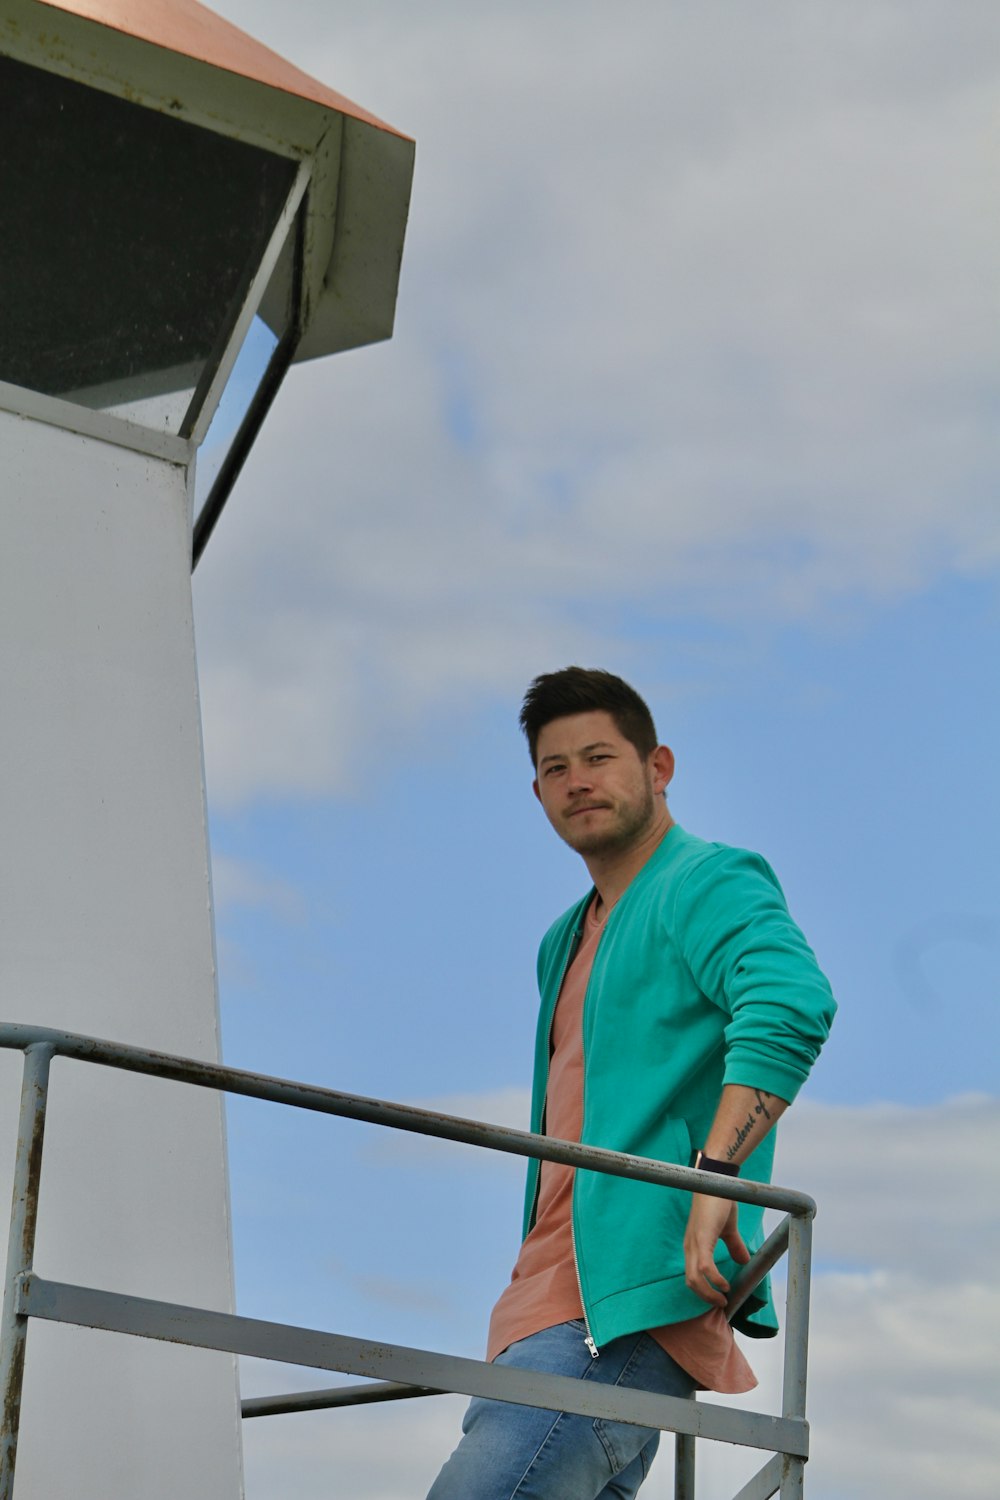 a man in a green jacket standing on a metal railing